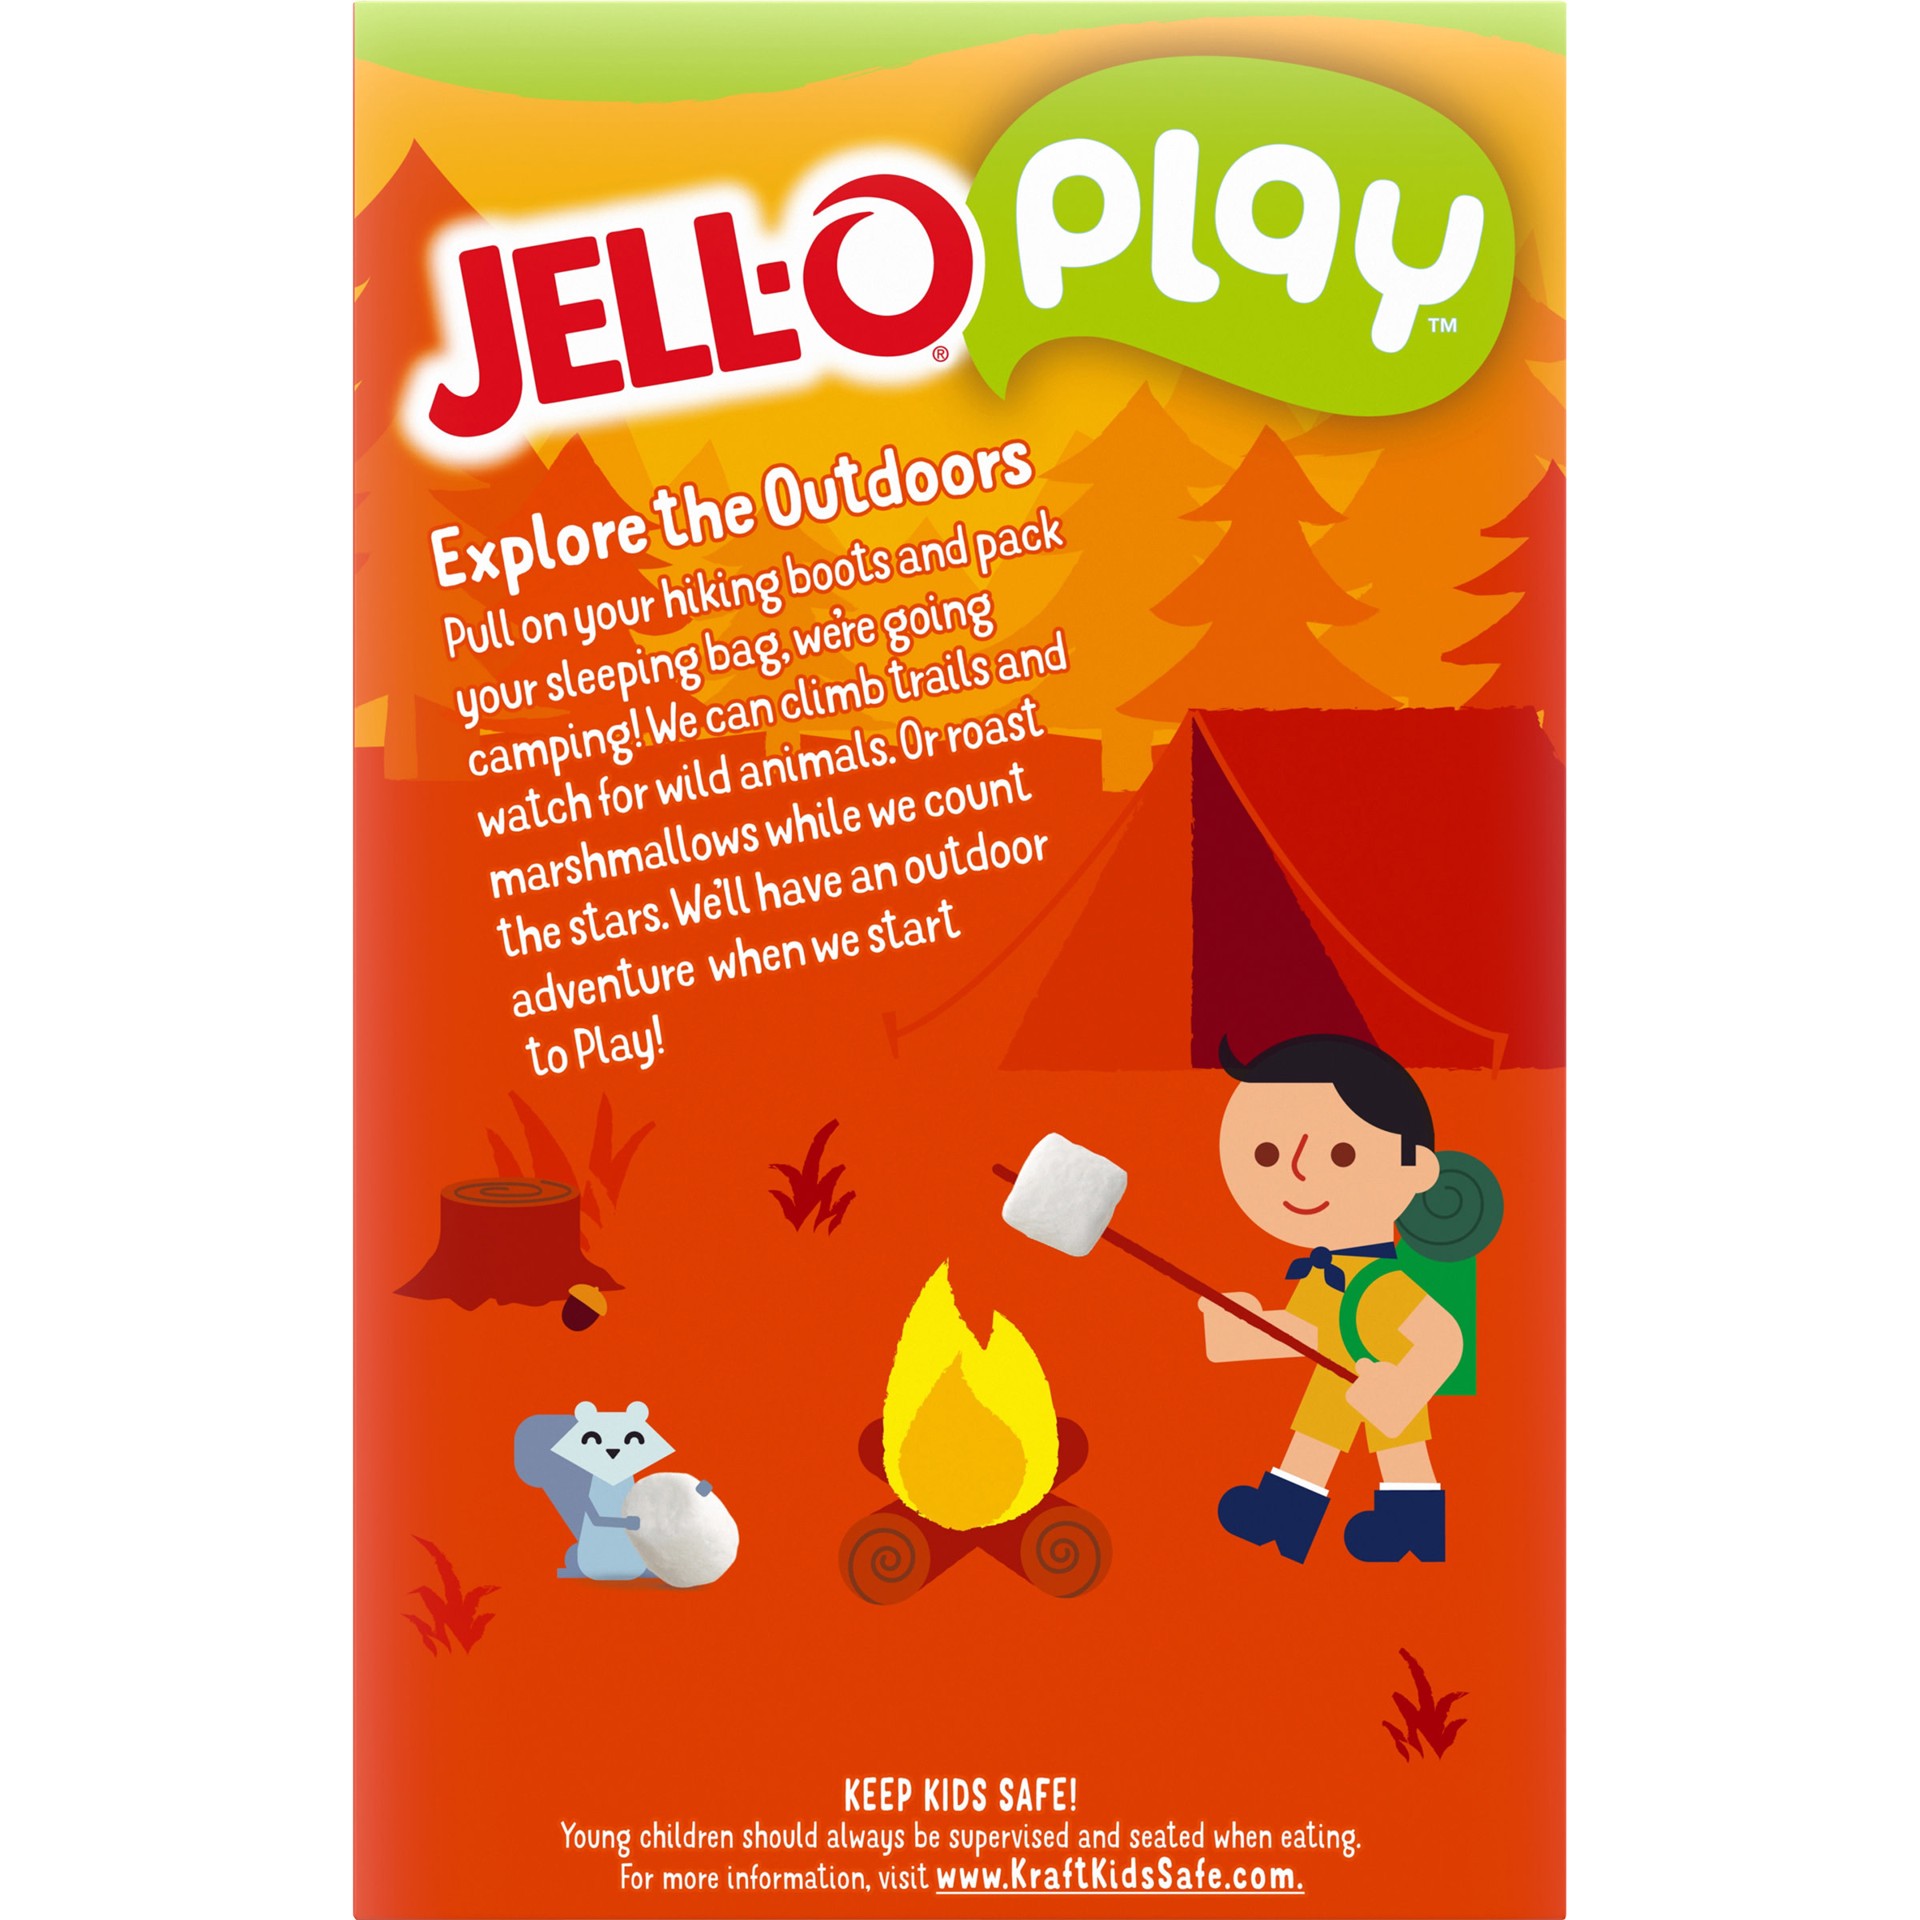 slide 2 of 11, Jell-O Play Camping Dessert Kit with Chocolate Pudding Mix, Graham Crumbs & Jet-Puffed Marshmallow Bits, 8.4 oz Box, 8.4 oz